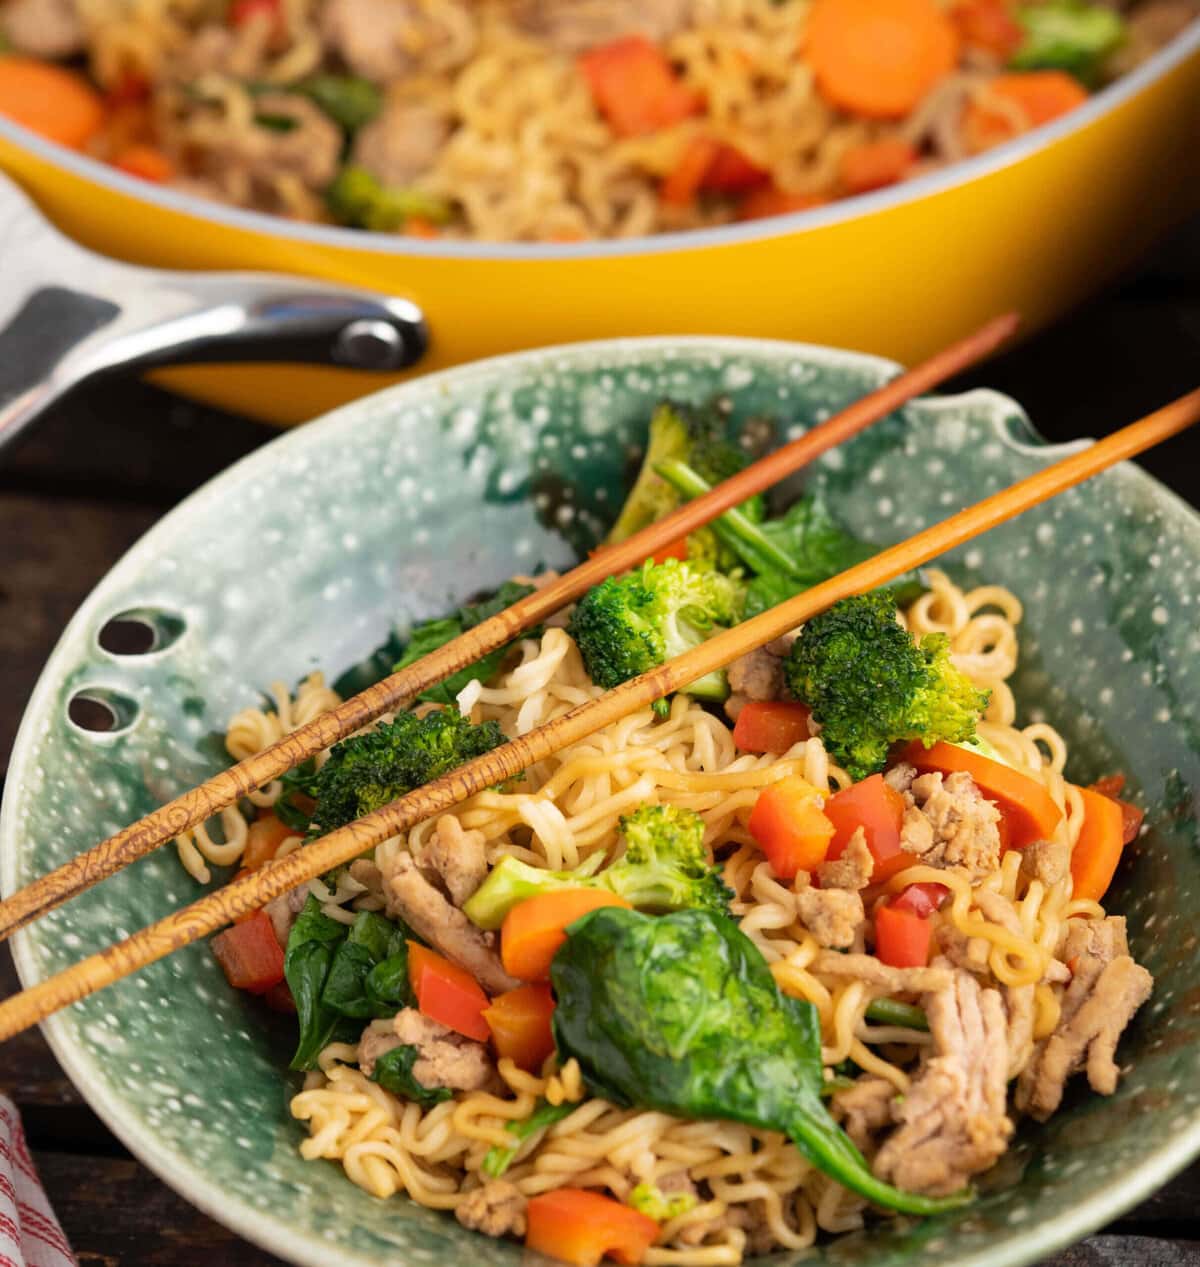 Pan-fried noodle dish in bowl with chopsticks.